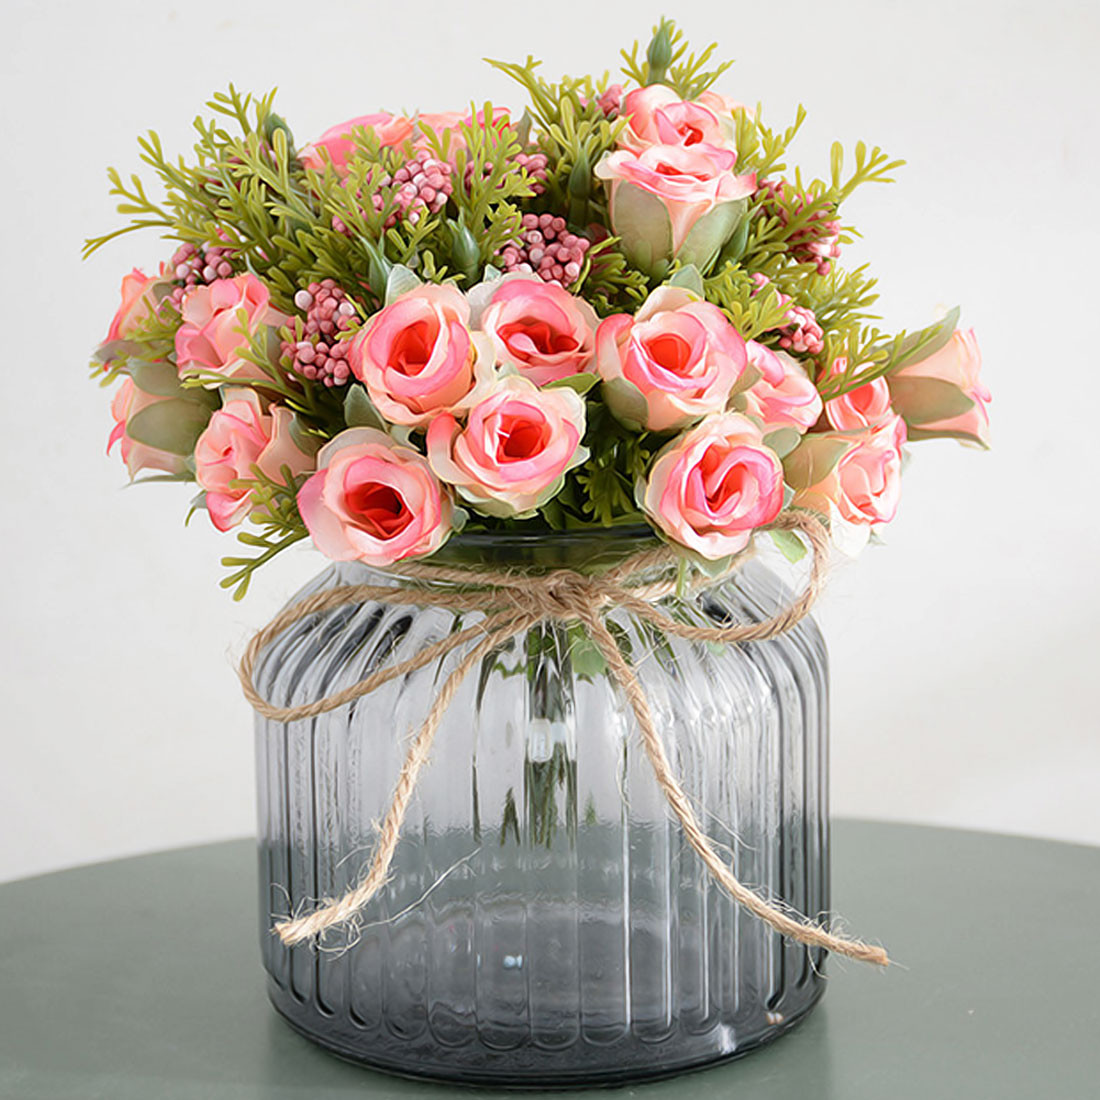 30 Famous Small Fake Flowers In Vase 2024 free download small fake flowers in vase of small bud silk roses simulation flowers artificial flowers 13 heads for total width20cm 1cm0 4 inch